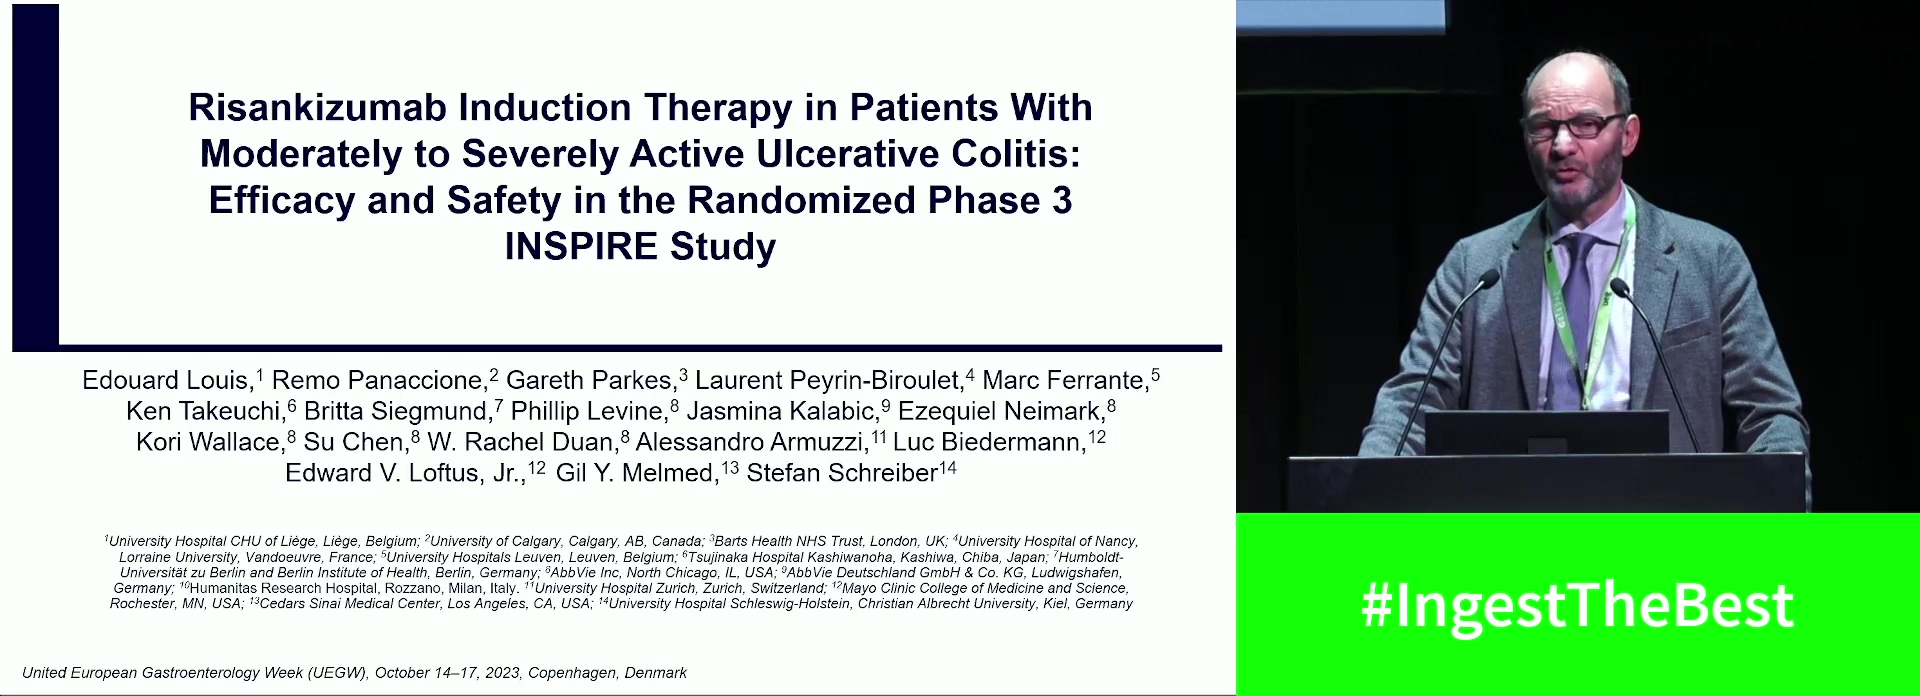 RISANKIZUMAB INDUCTION THERAPY IN PATIENTS WITH MODERATELY TO SEVERELY ACTIVE ULCERATIVE COLITIS: EFFICACY AND SAFETY IN THE RANDOMIZED PHASE 3 INSPIRE STUDY